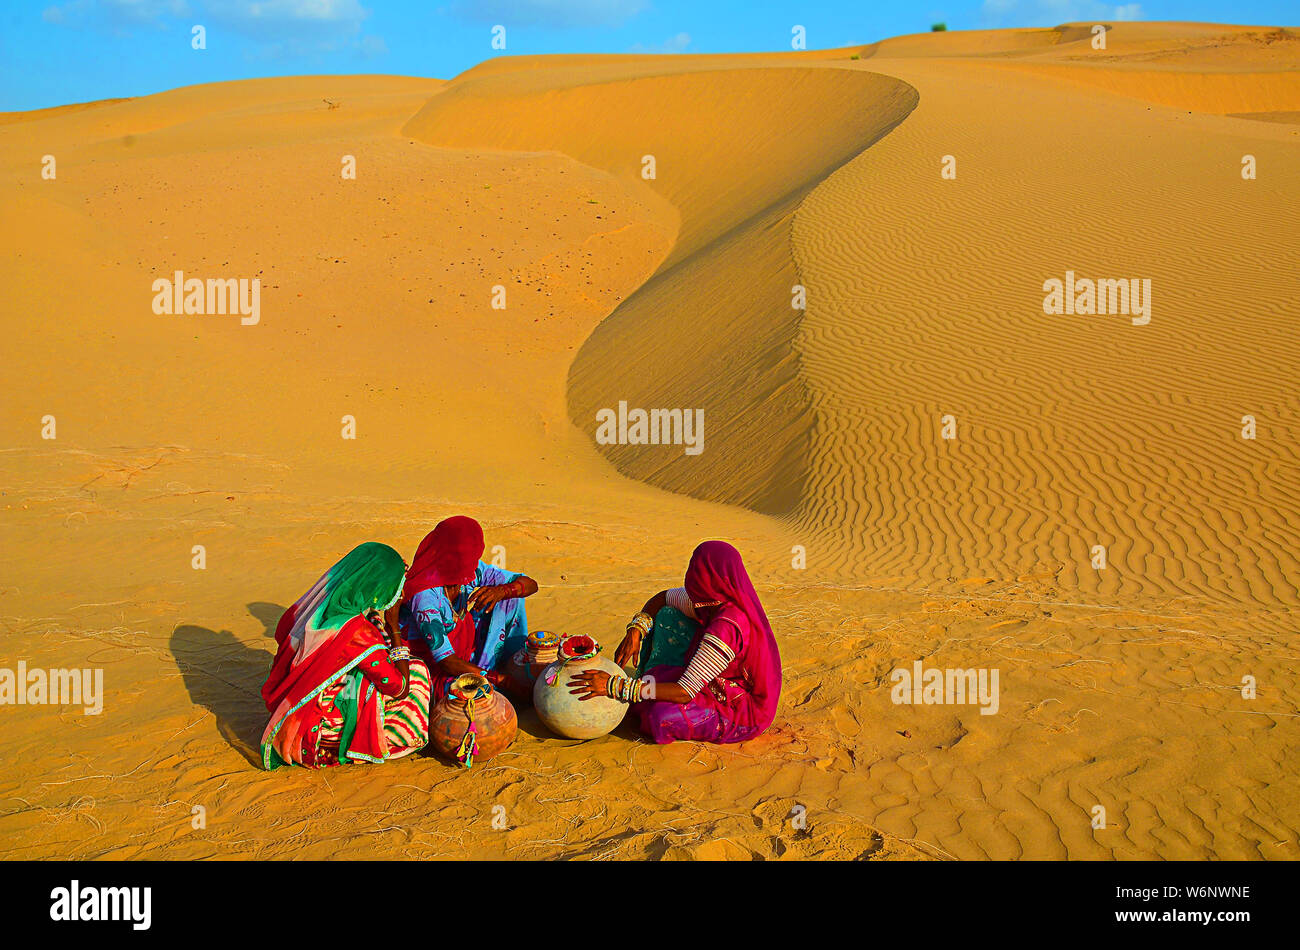 Indian village women sitting on in desert wearing ethnic traditional outfits with water jugs water crises, jaisalmer, rajasthan, india Stock Photo